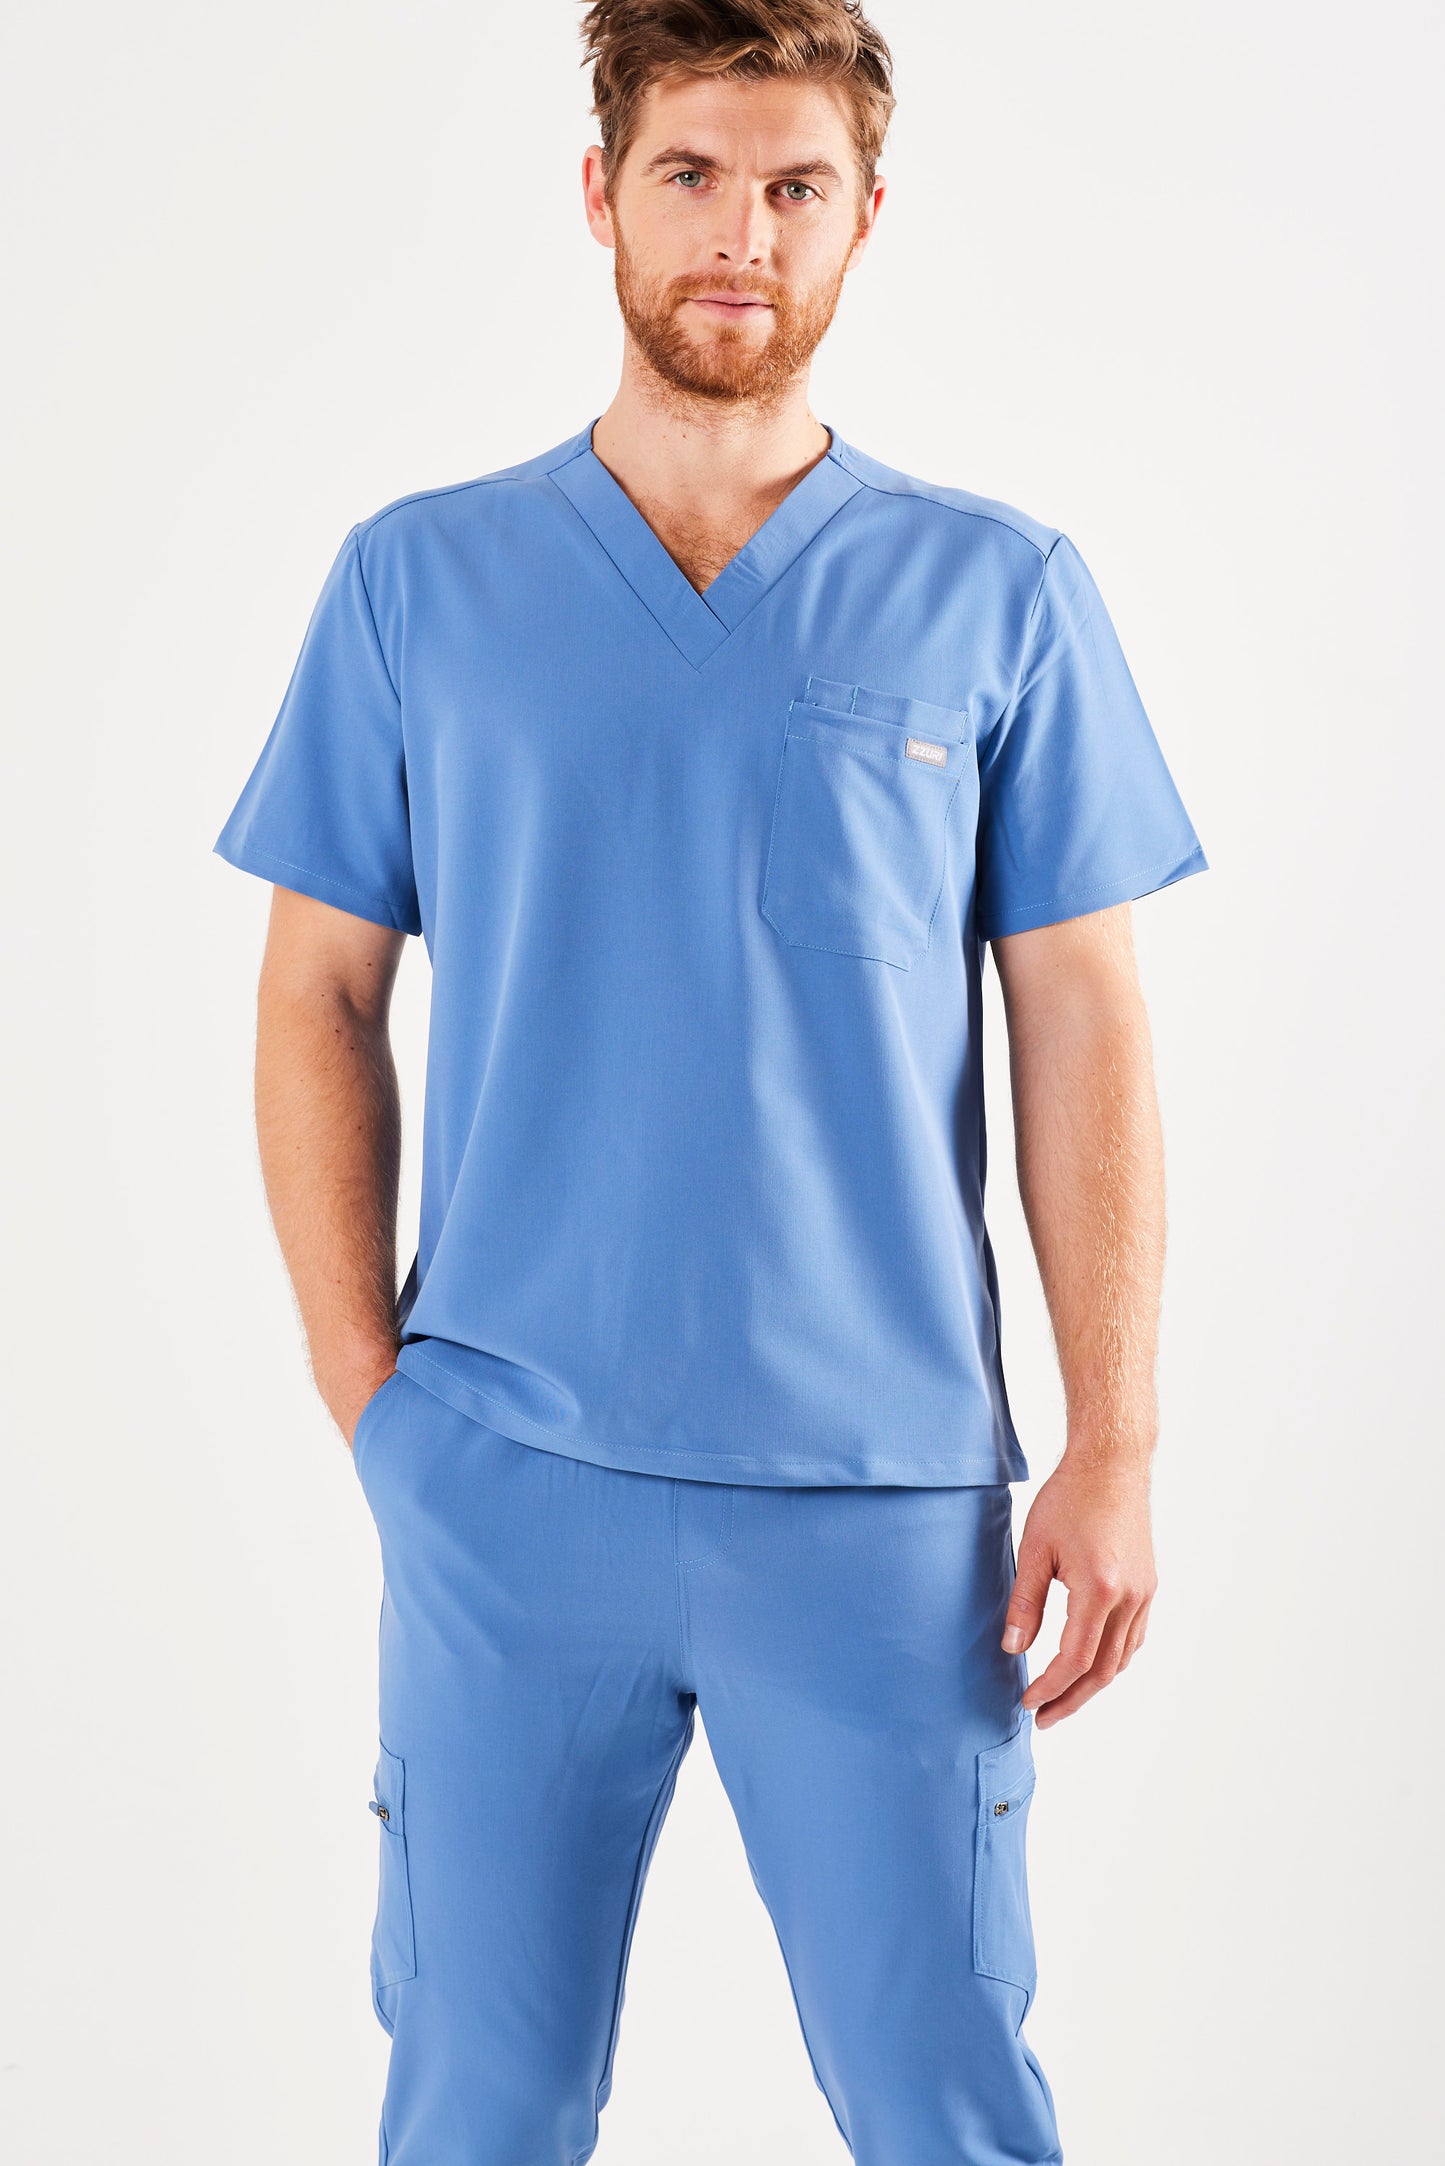 CLASSIC V-NECK WITH SIDE POCKETS MEN'S SCRUB TOP (CEIL BLUE) - NEW ARRIVALS